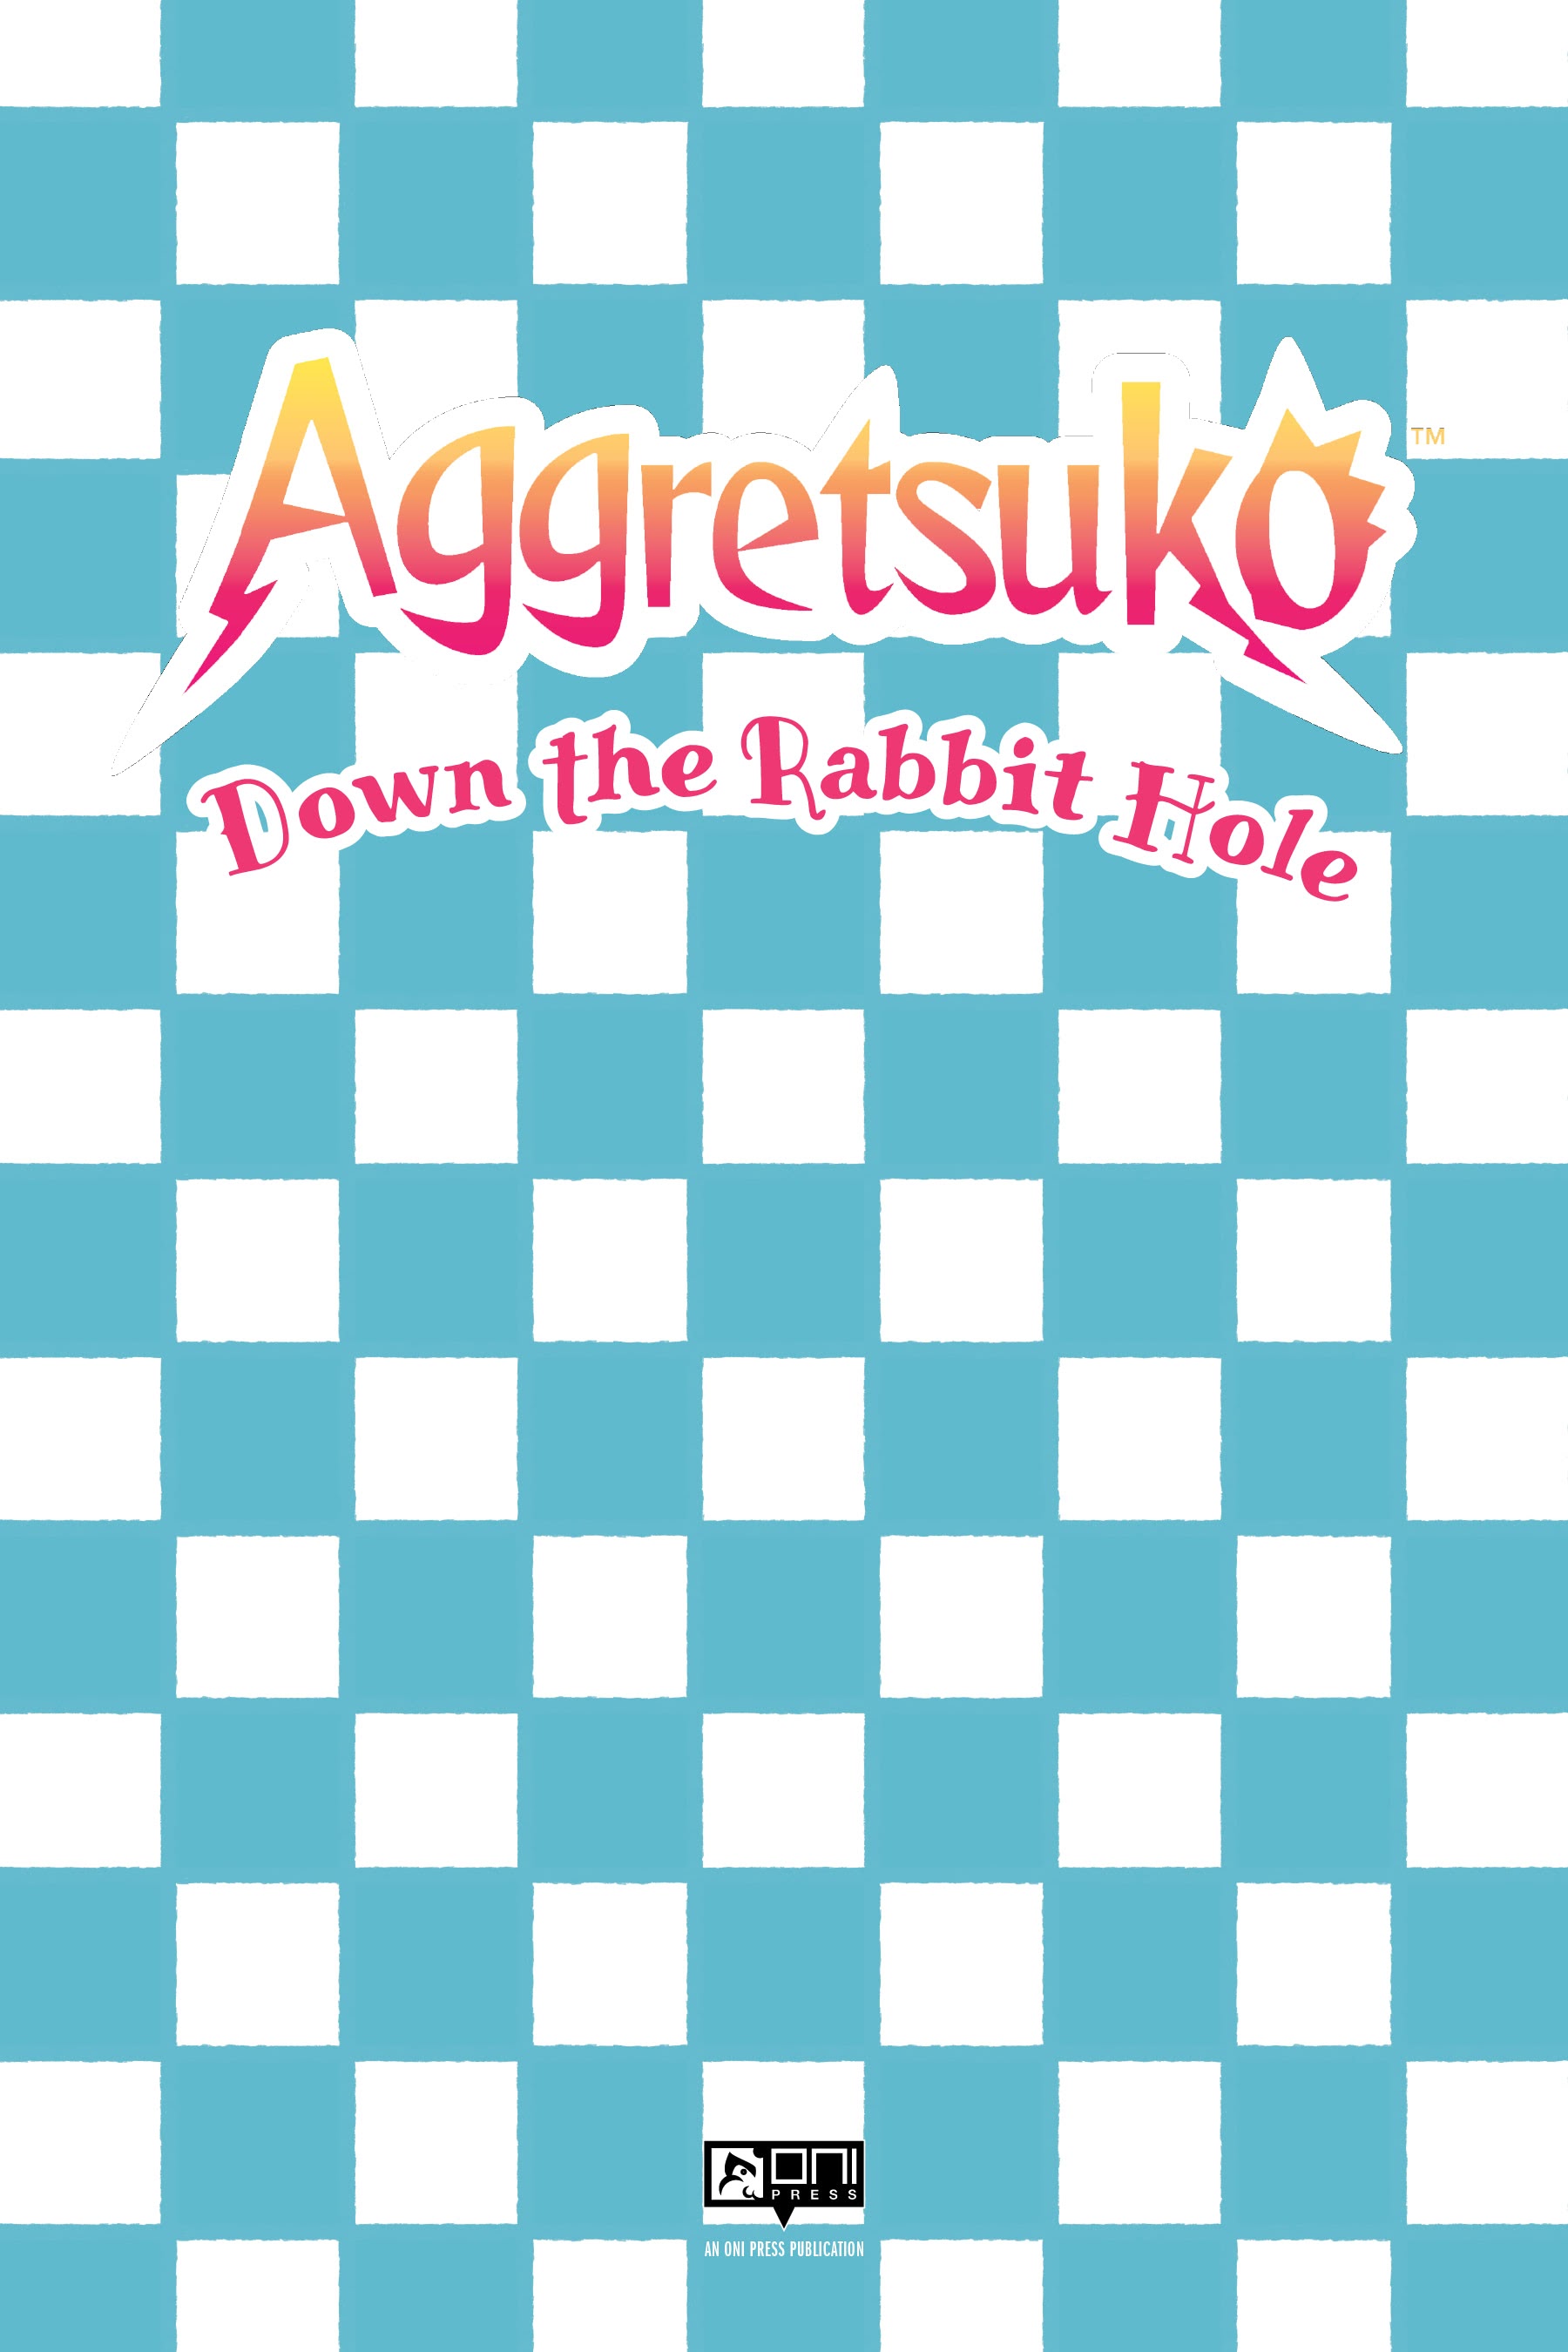 Read online Aggretsuko: Down the Rabbit Hole comic -  Issue # TPB - 2